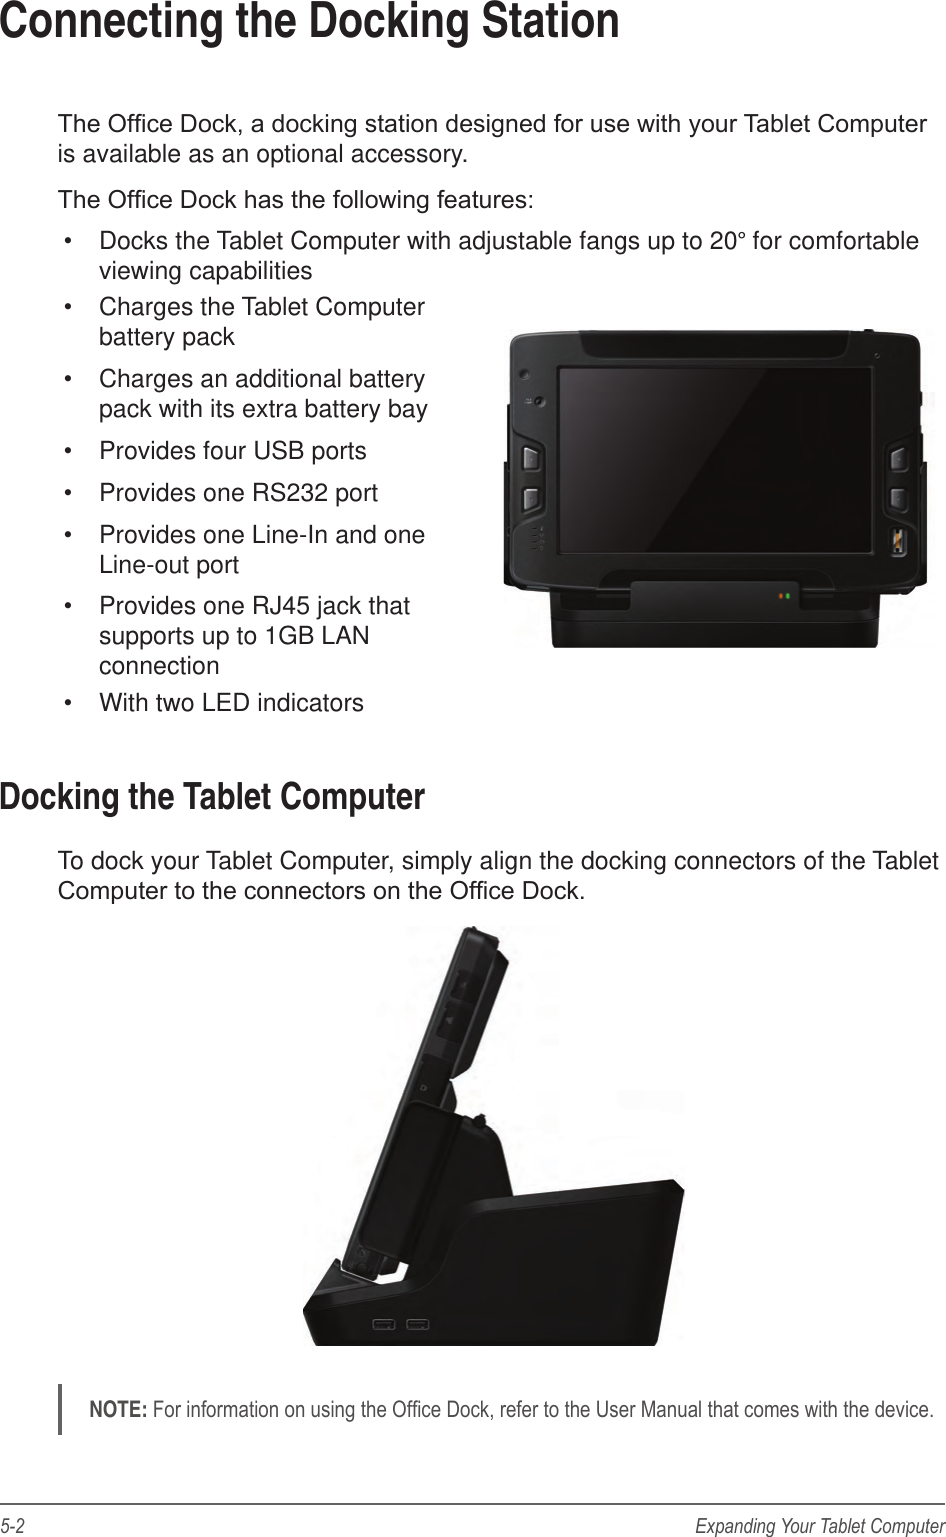 5-2 Expanding Your Tablet ComputerConnecting the Docking StationThe Ofce Dock, a docking station designed for use with your Tablet Computer is available as an optional accessory. The Ofce Dock has the following features:•  Docks the Tablet Computer with adjustable fangs up to 20° for comfortable viewing capabilities•  Charges the Tablet Computer battery pack•  Charges an additional battery pack with its extra battery bay•  Provides four USB ports•  Provides one RS232 port•  Provides one Line-In and one Line-out port•  Provides one RJ45 jack that supports up to 1GB LAN connection•  With two LED indicatorsDocking the Tablet ComputerTo dock your Tablet Computer, simply align the docking connectors of the Tablet Computer to the connectors on the Ofce Dock. NOTE: For information on using the Ofce Dock, refer to the User Manual that comes with the device.